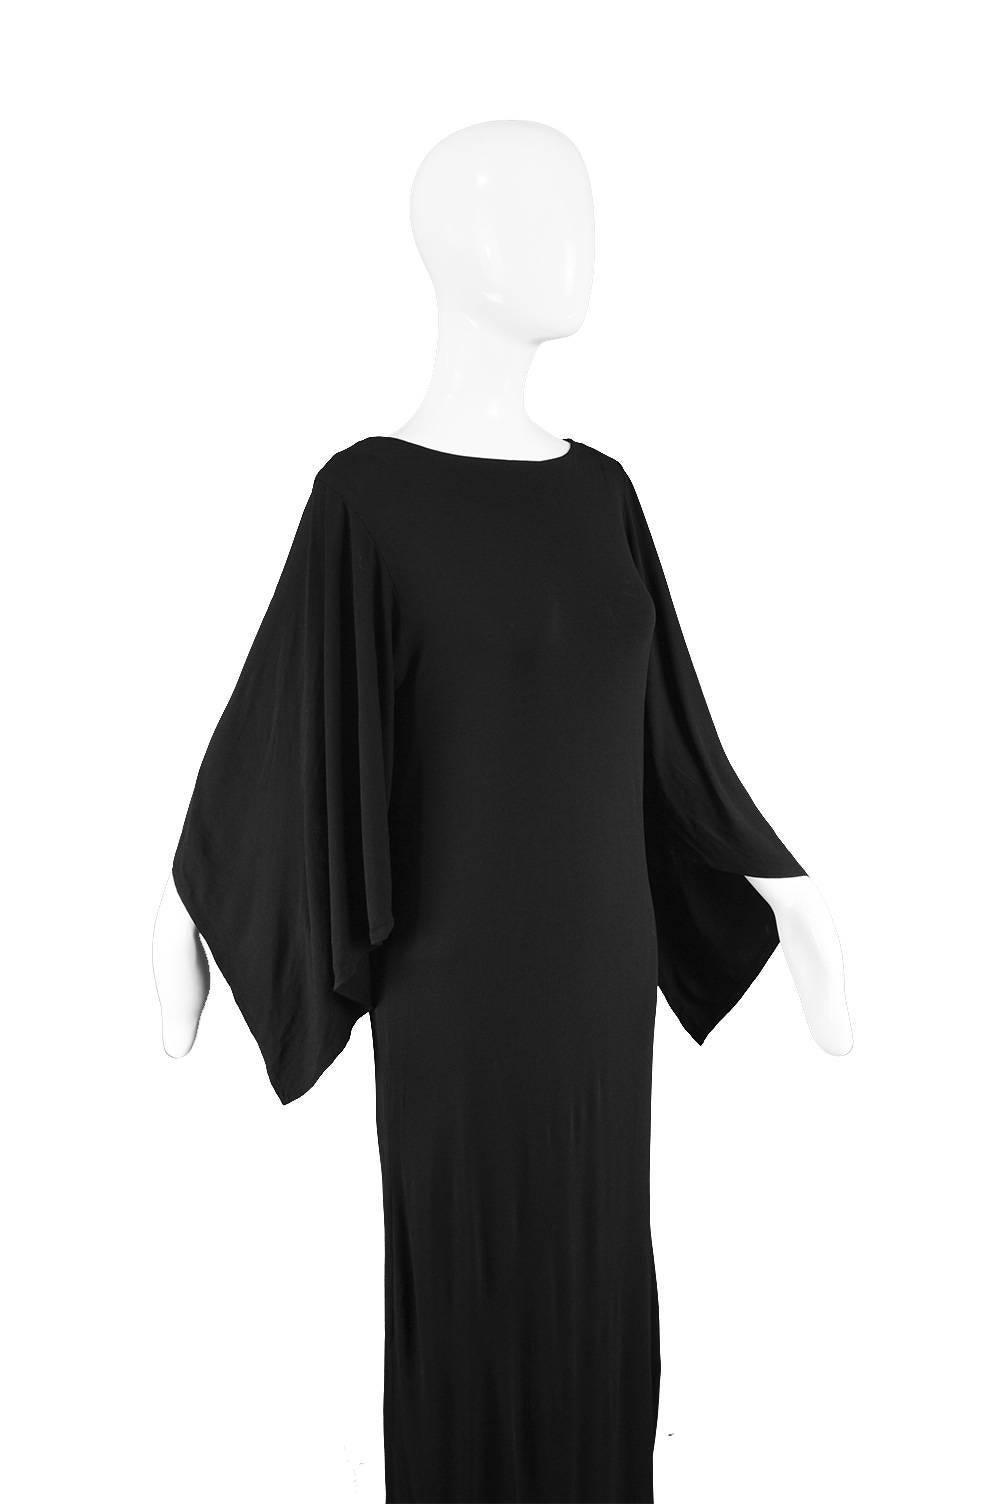 Givenchy Vintage Nouvelle Boutique Black Jersey Maxi Column Dress, 1970s In Good Condition For Sale In Doncaster, South Yorkshire